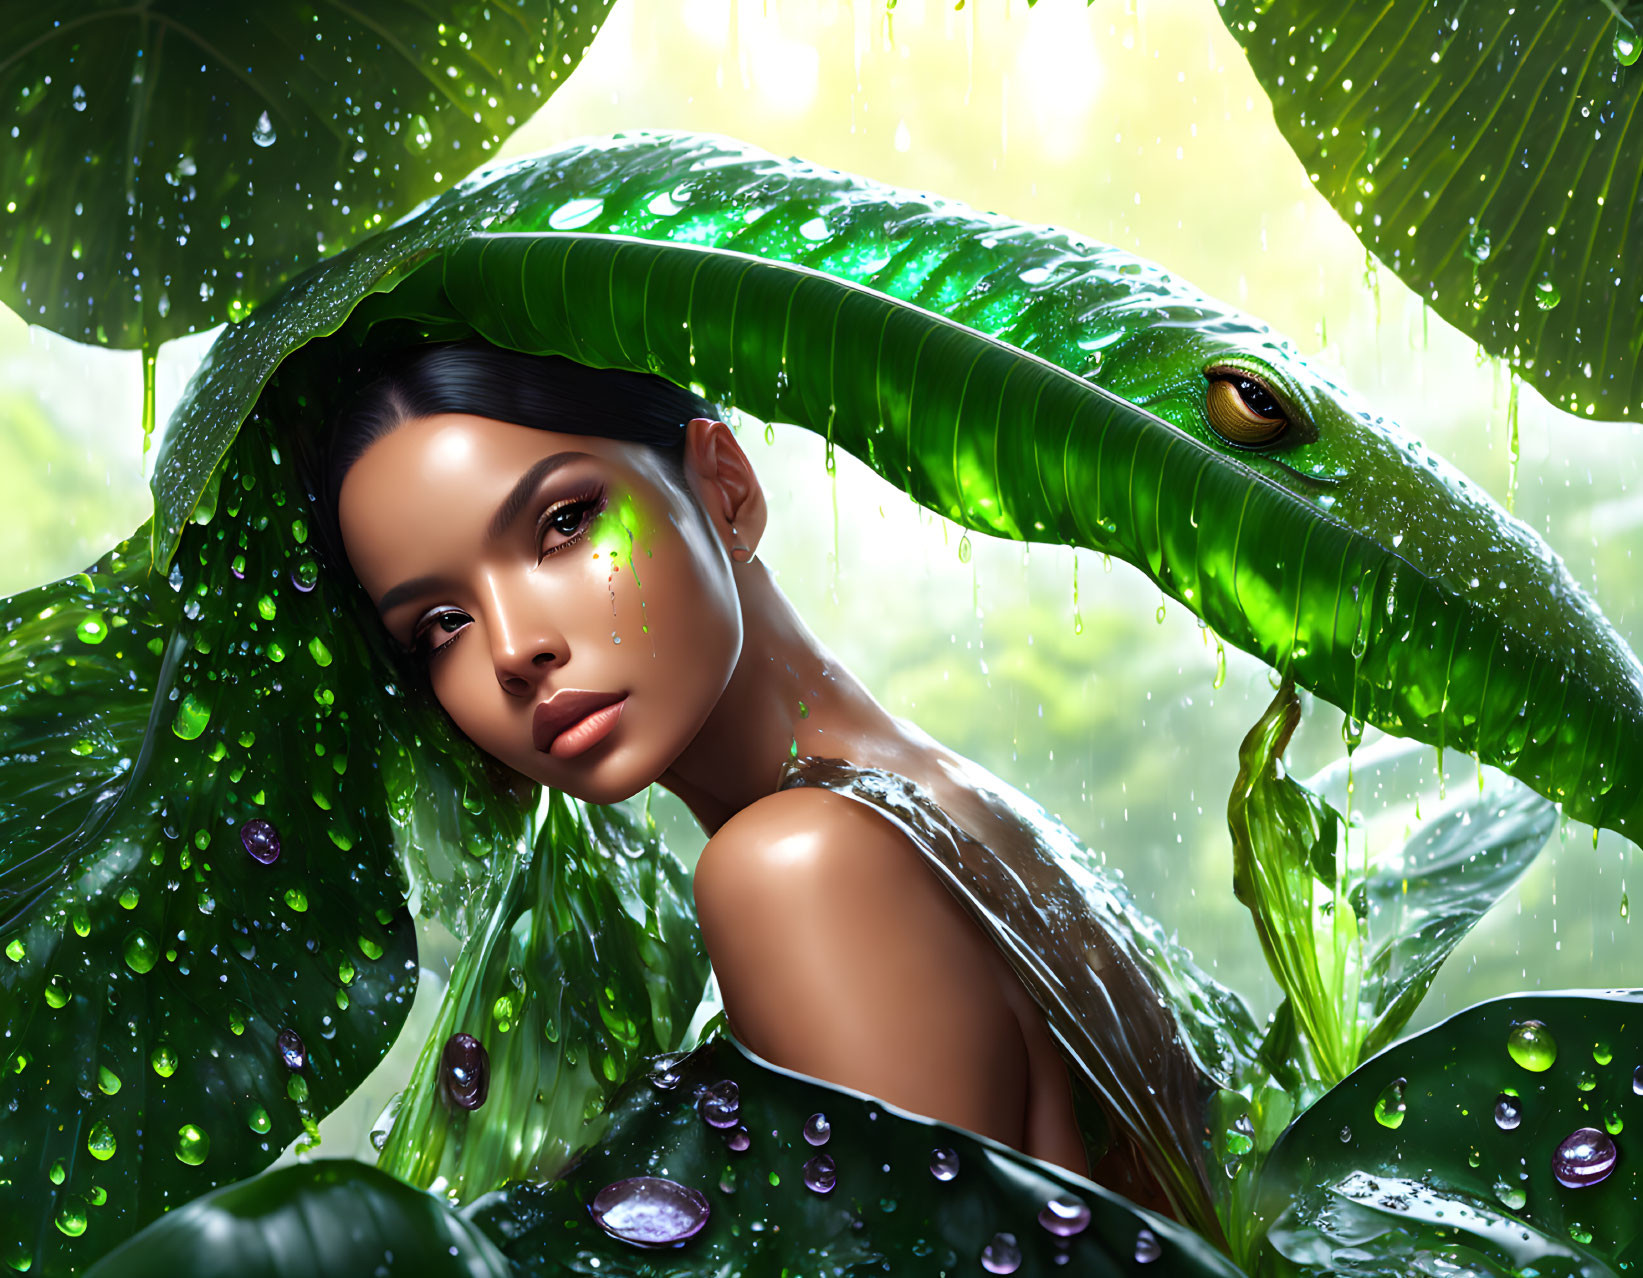 Woman with wet skin and glossy lips among green leaves and snake with water droplets